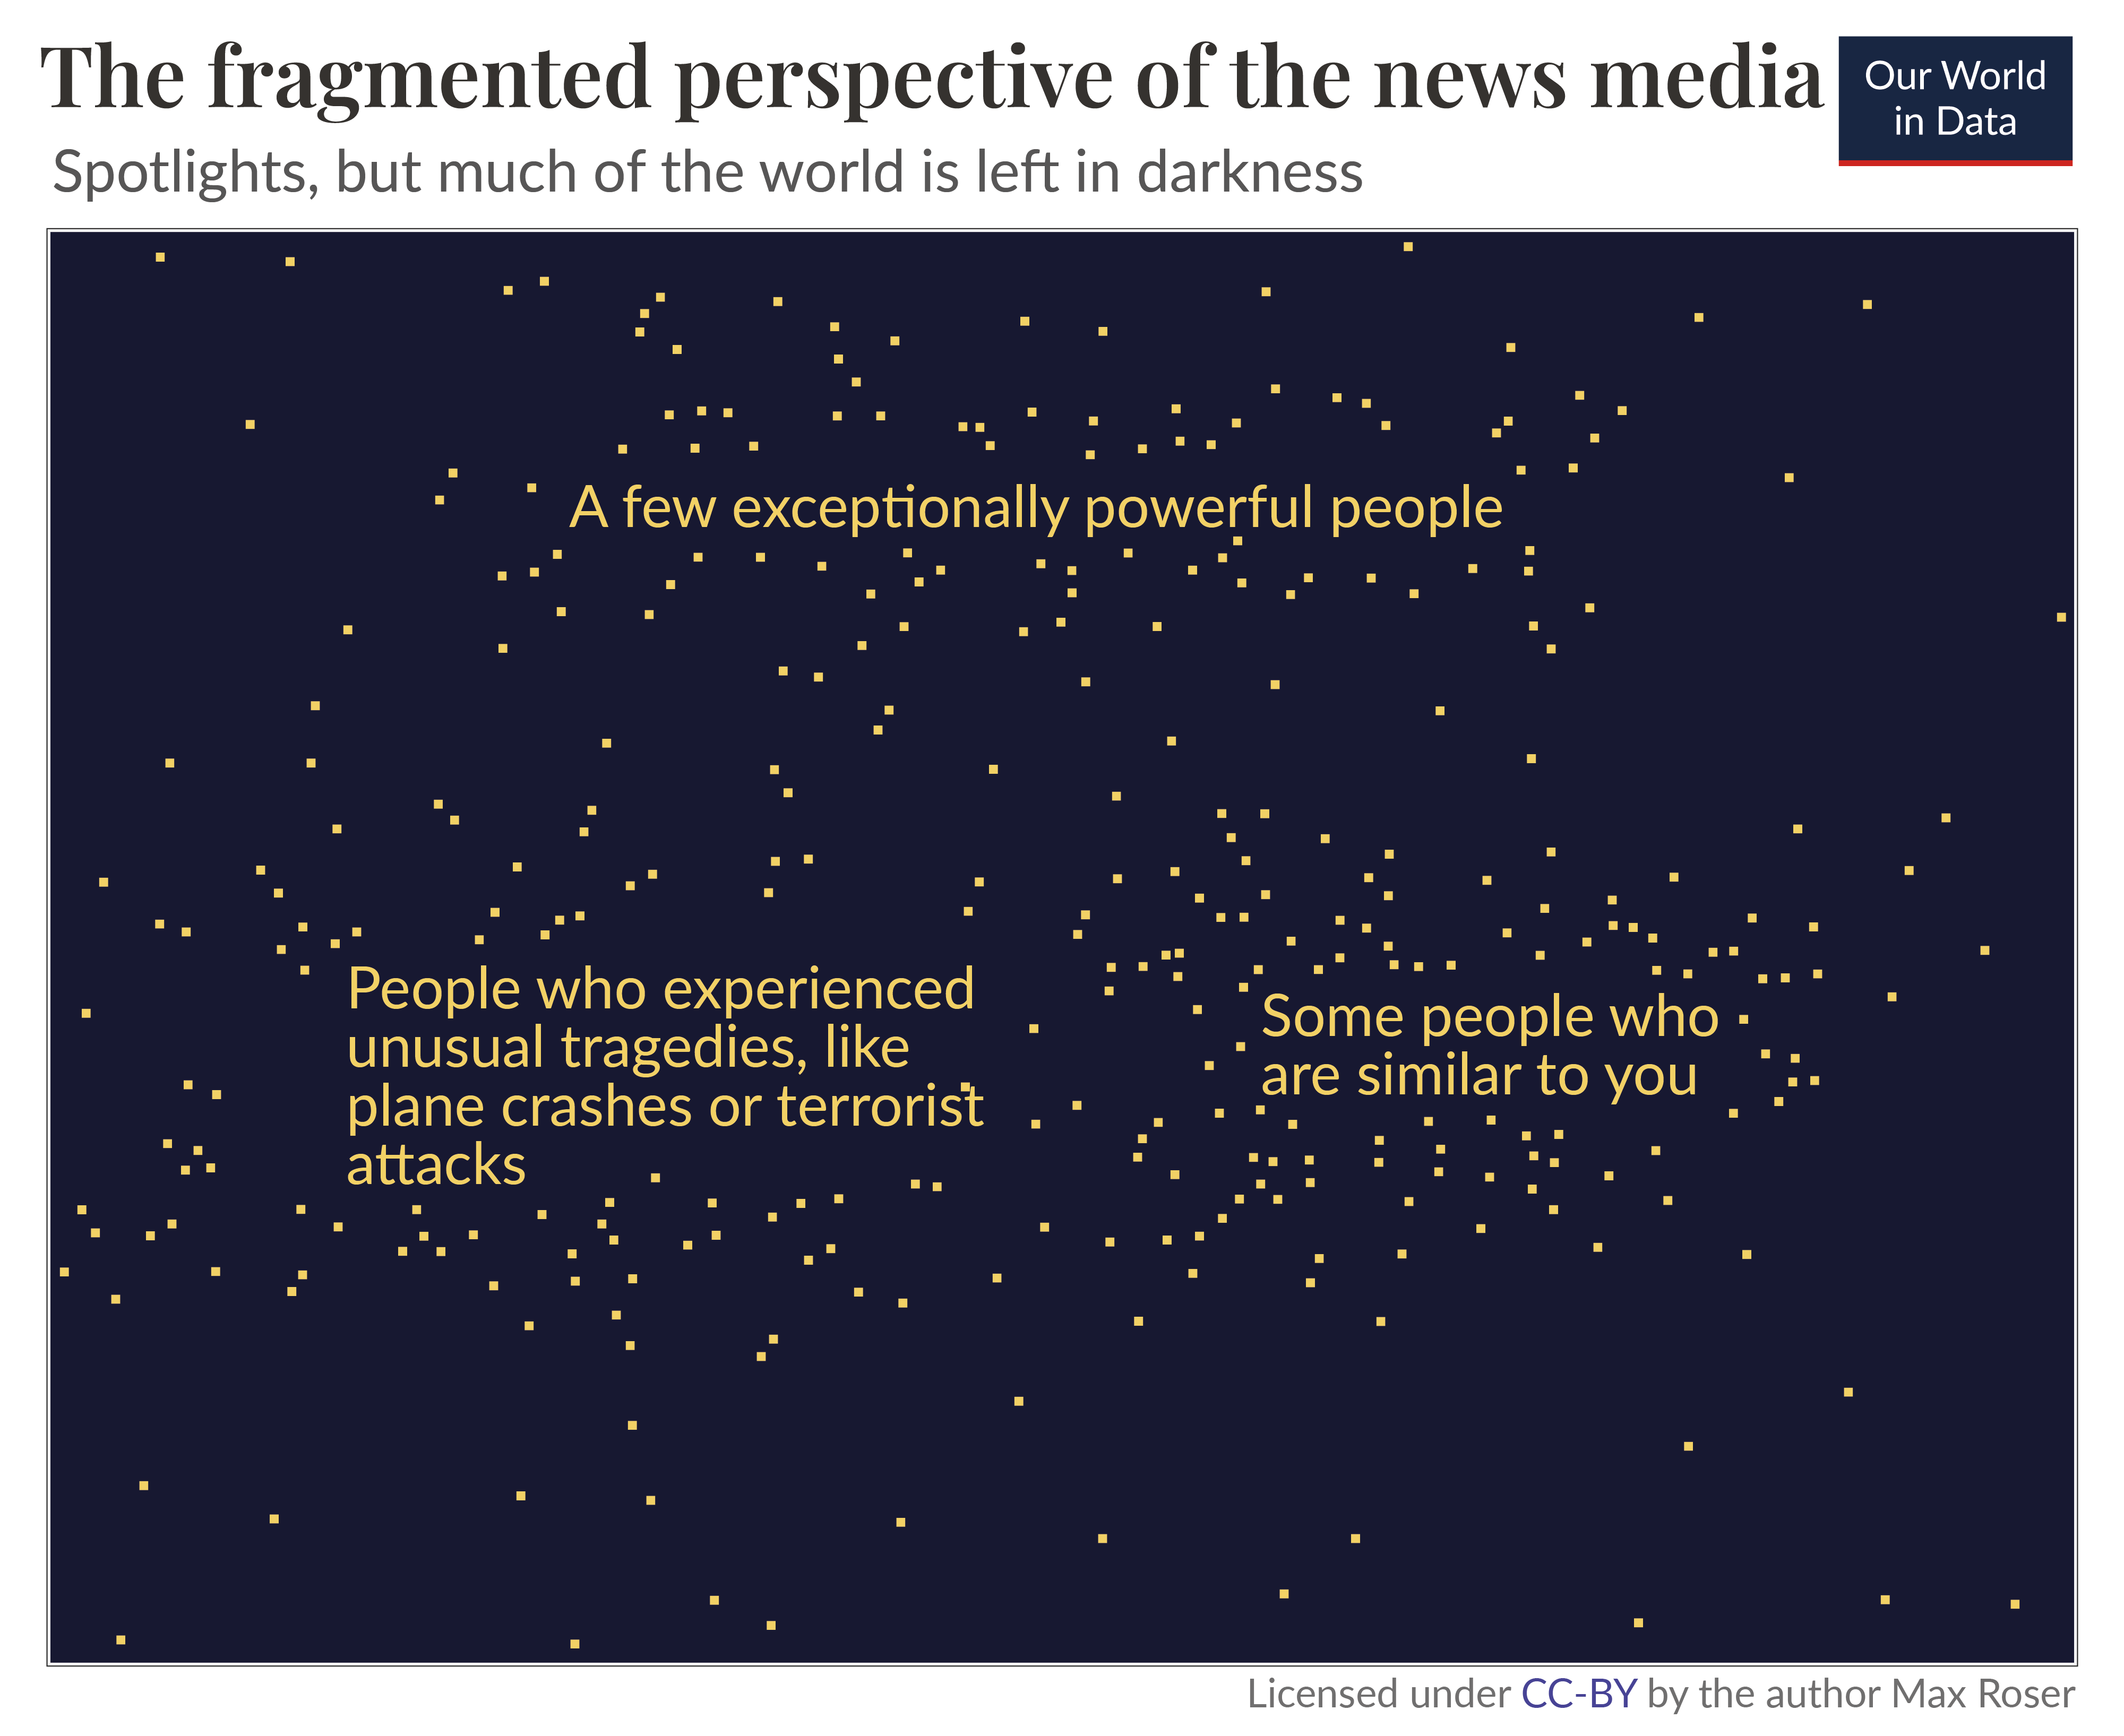 The fragmented perspective of the news media – Spotlights, but much of the world is left in darkness